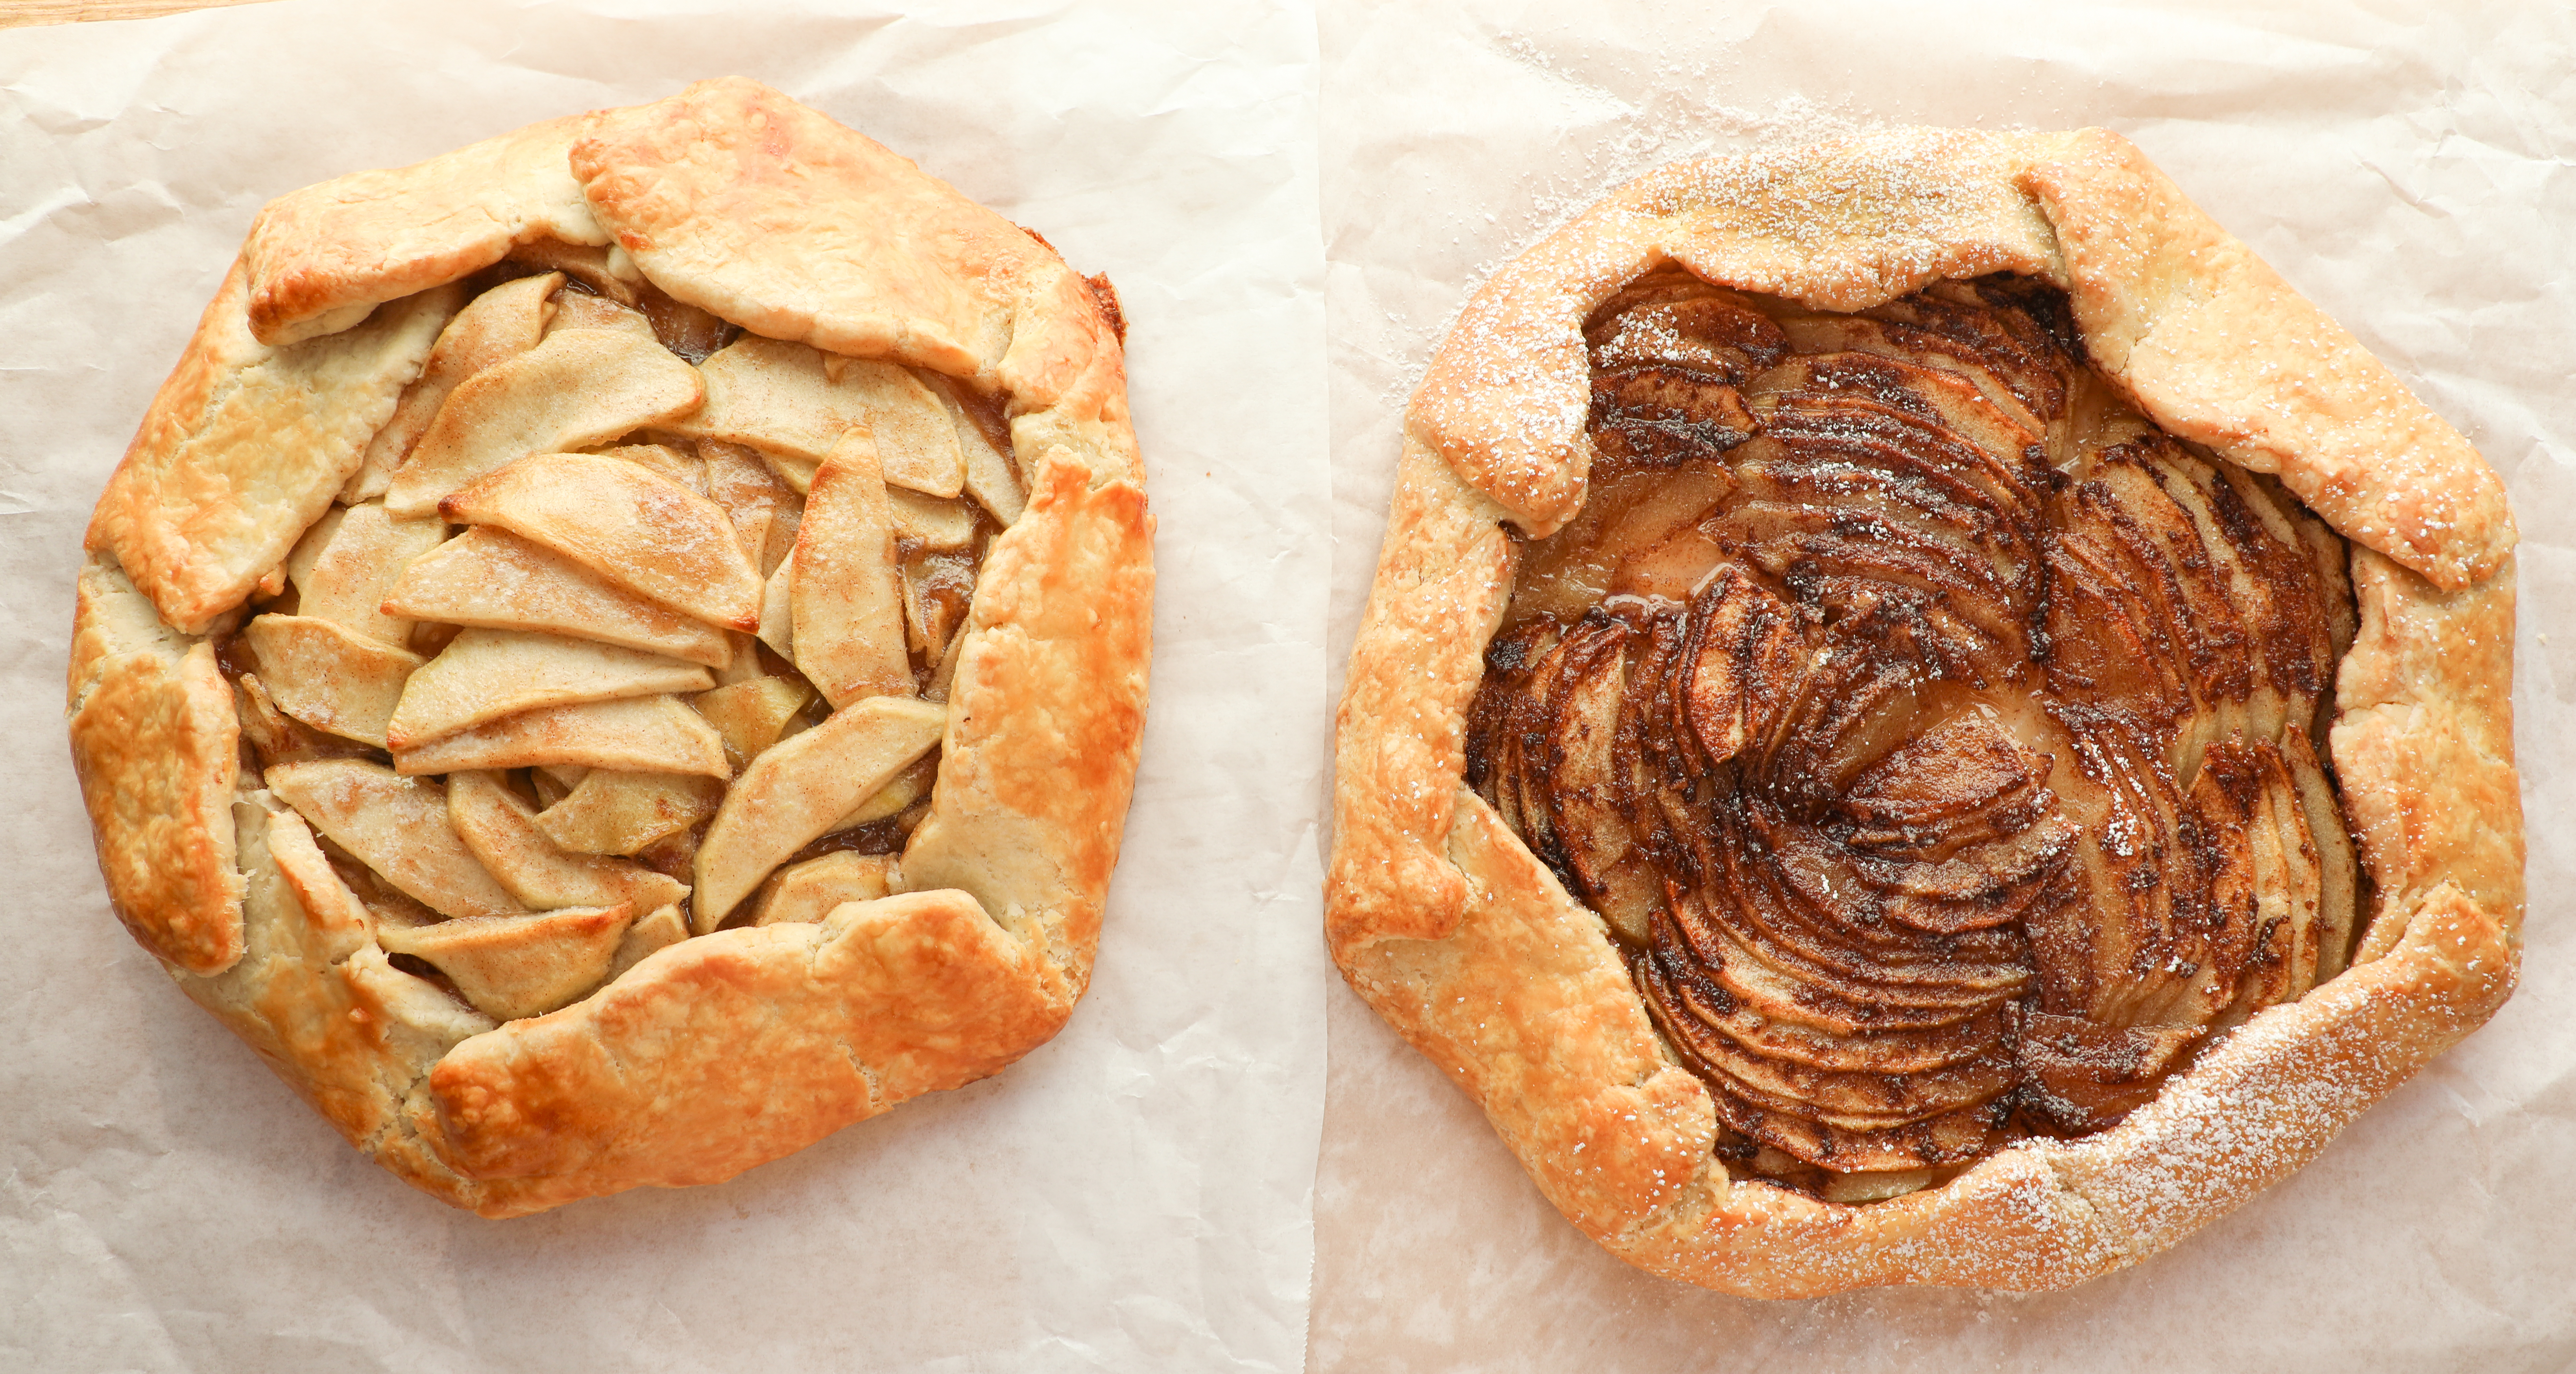 side by side comparison of apple galette withe precooked apples vs. without precooked apples